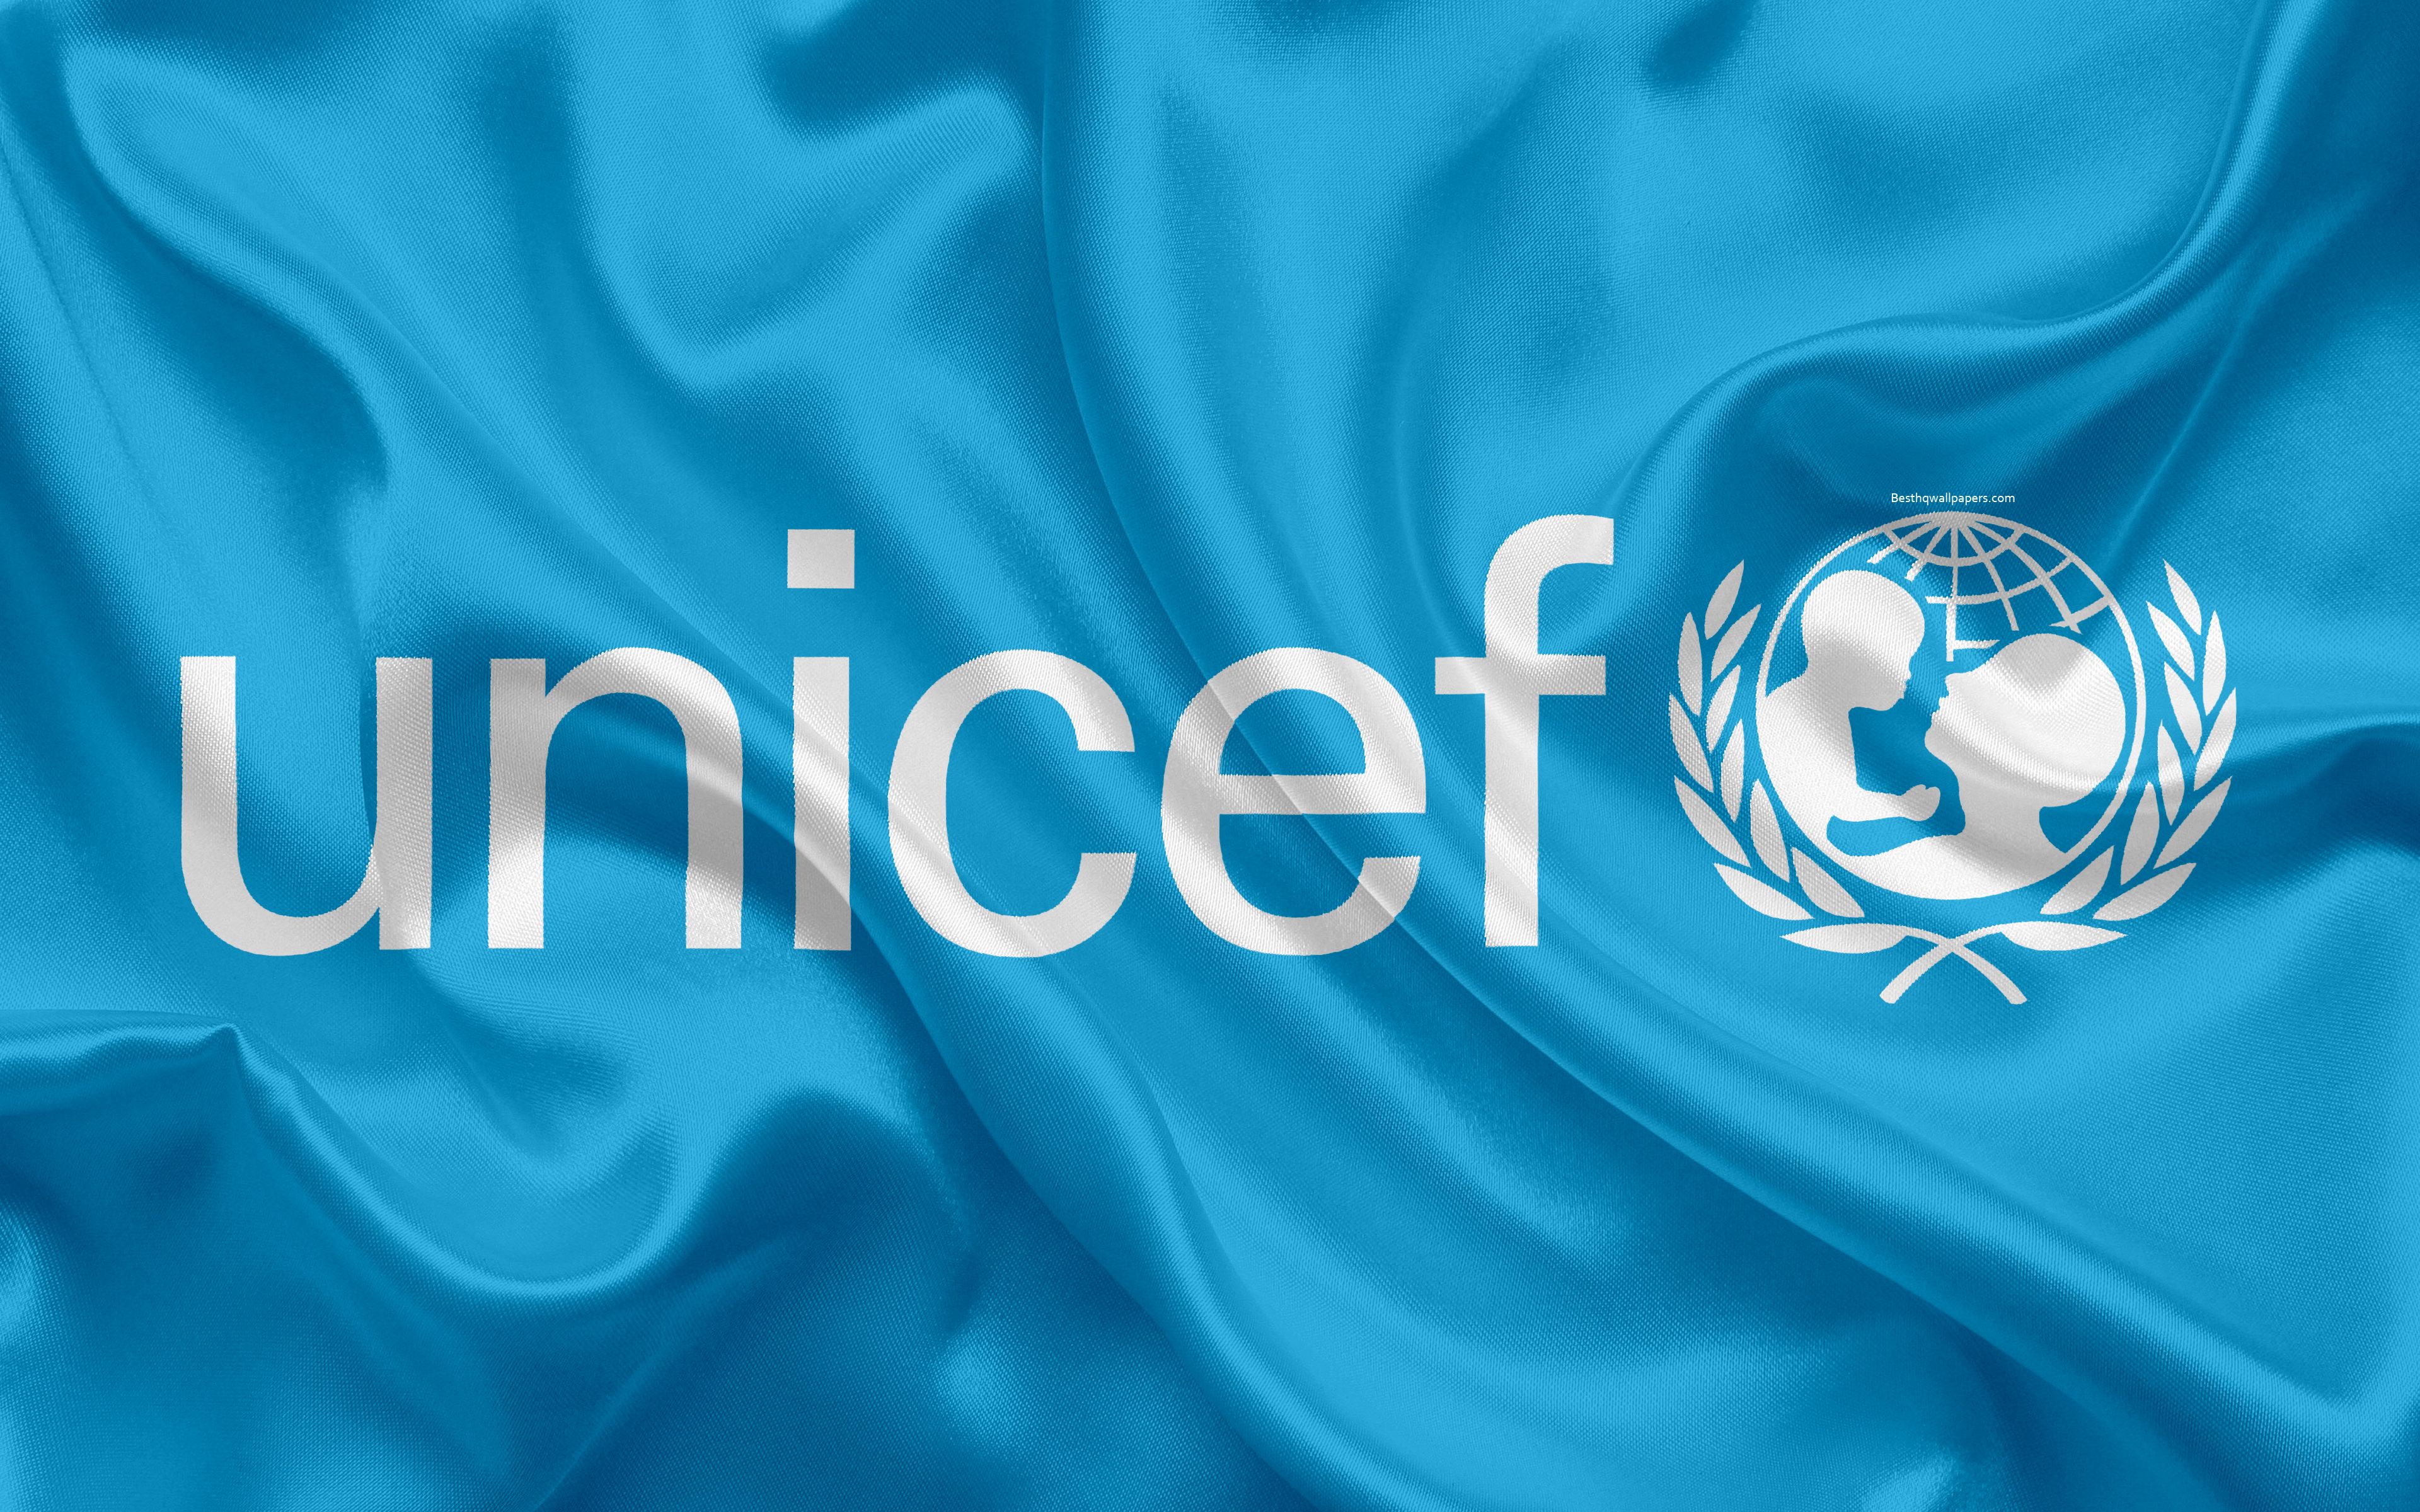 Download wallpaper UNICEF, Childrens Fund, UN, International Organization, United Nations for desktop with resolution 3840x2400. High Quality HD picture wallpaper